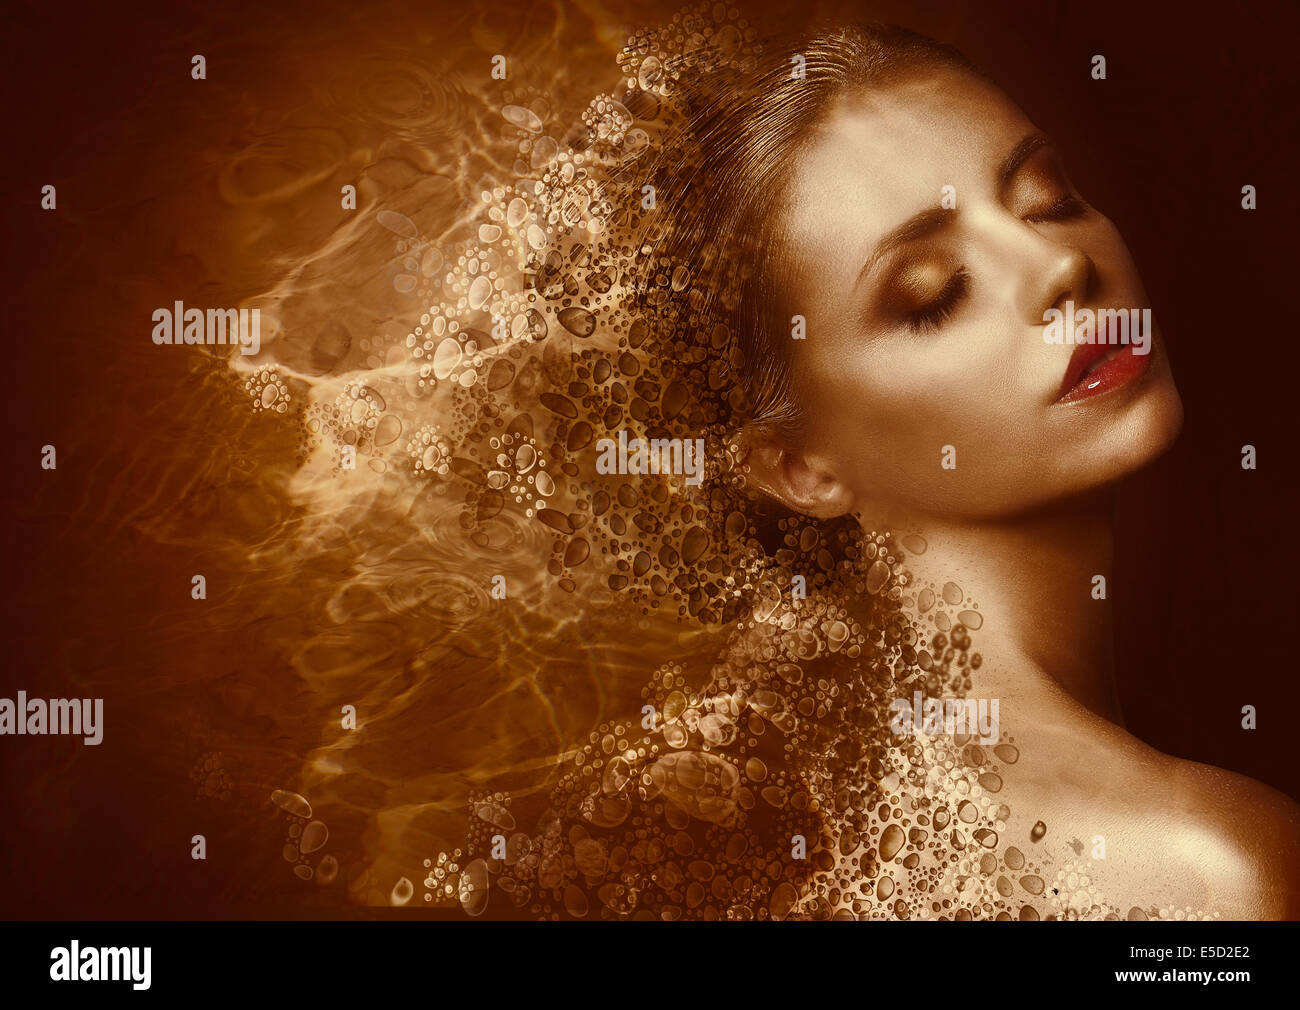 Golden Splatter. Futuristic Woman with Bronzed Painted Skin. Fantasy Stock Photo